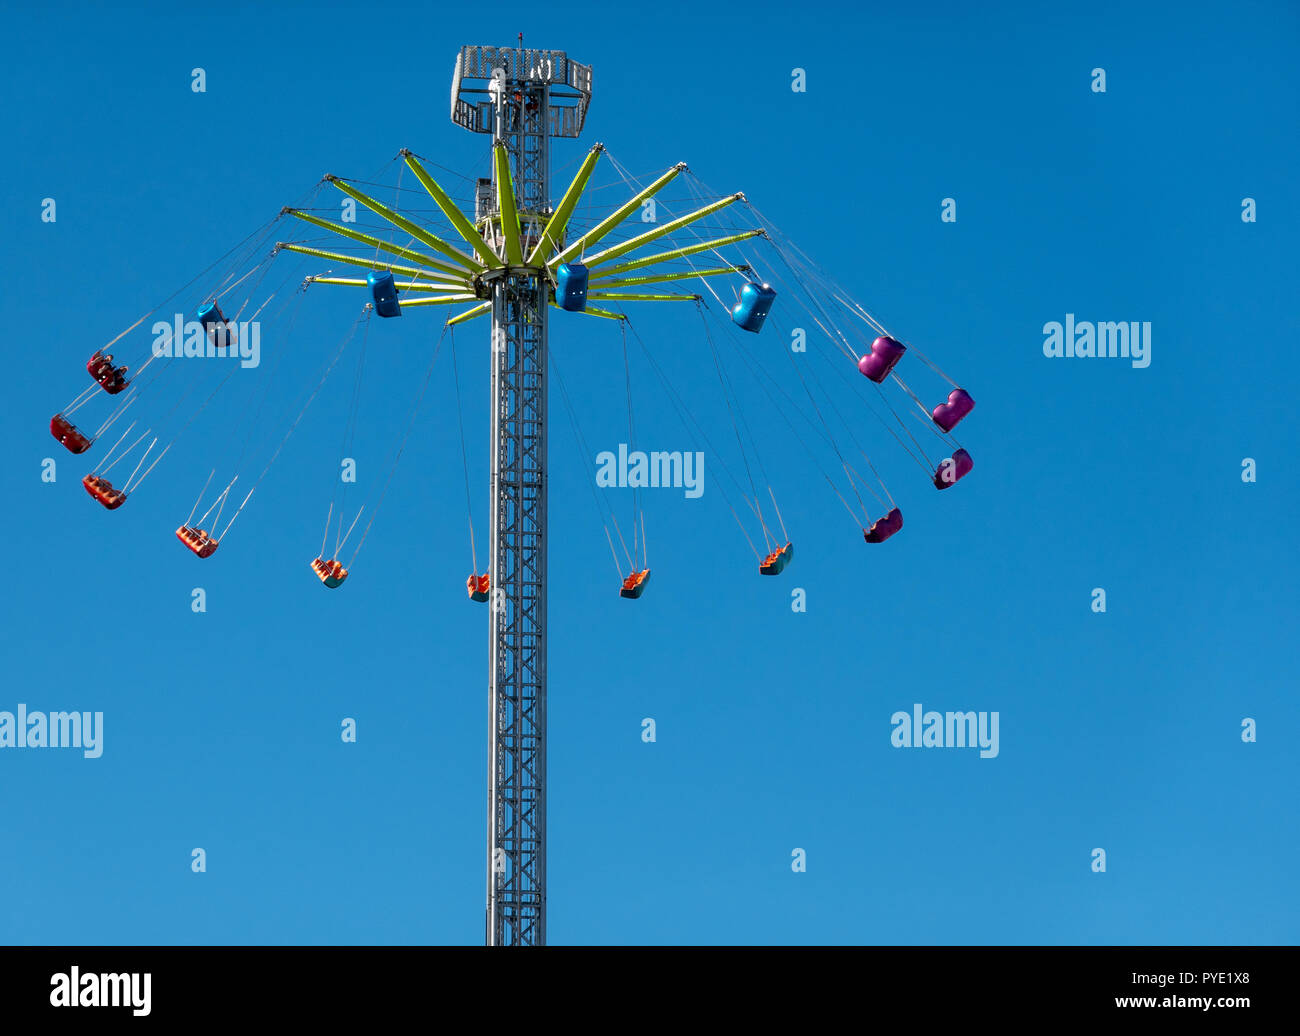 Honnover, Lower Saxony, Germany, October 13., 2018: Huge chain carousel with gondolas at a height of 60 metres in front of a bright blue sky Stock Photo